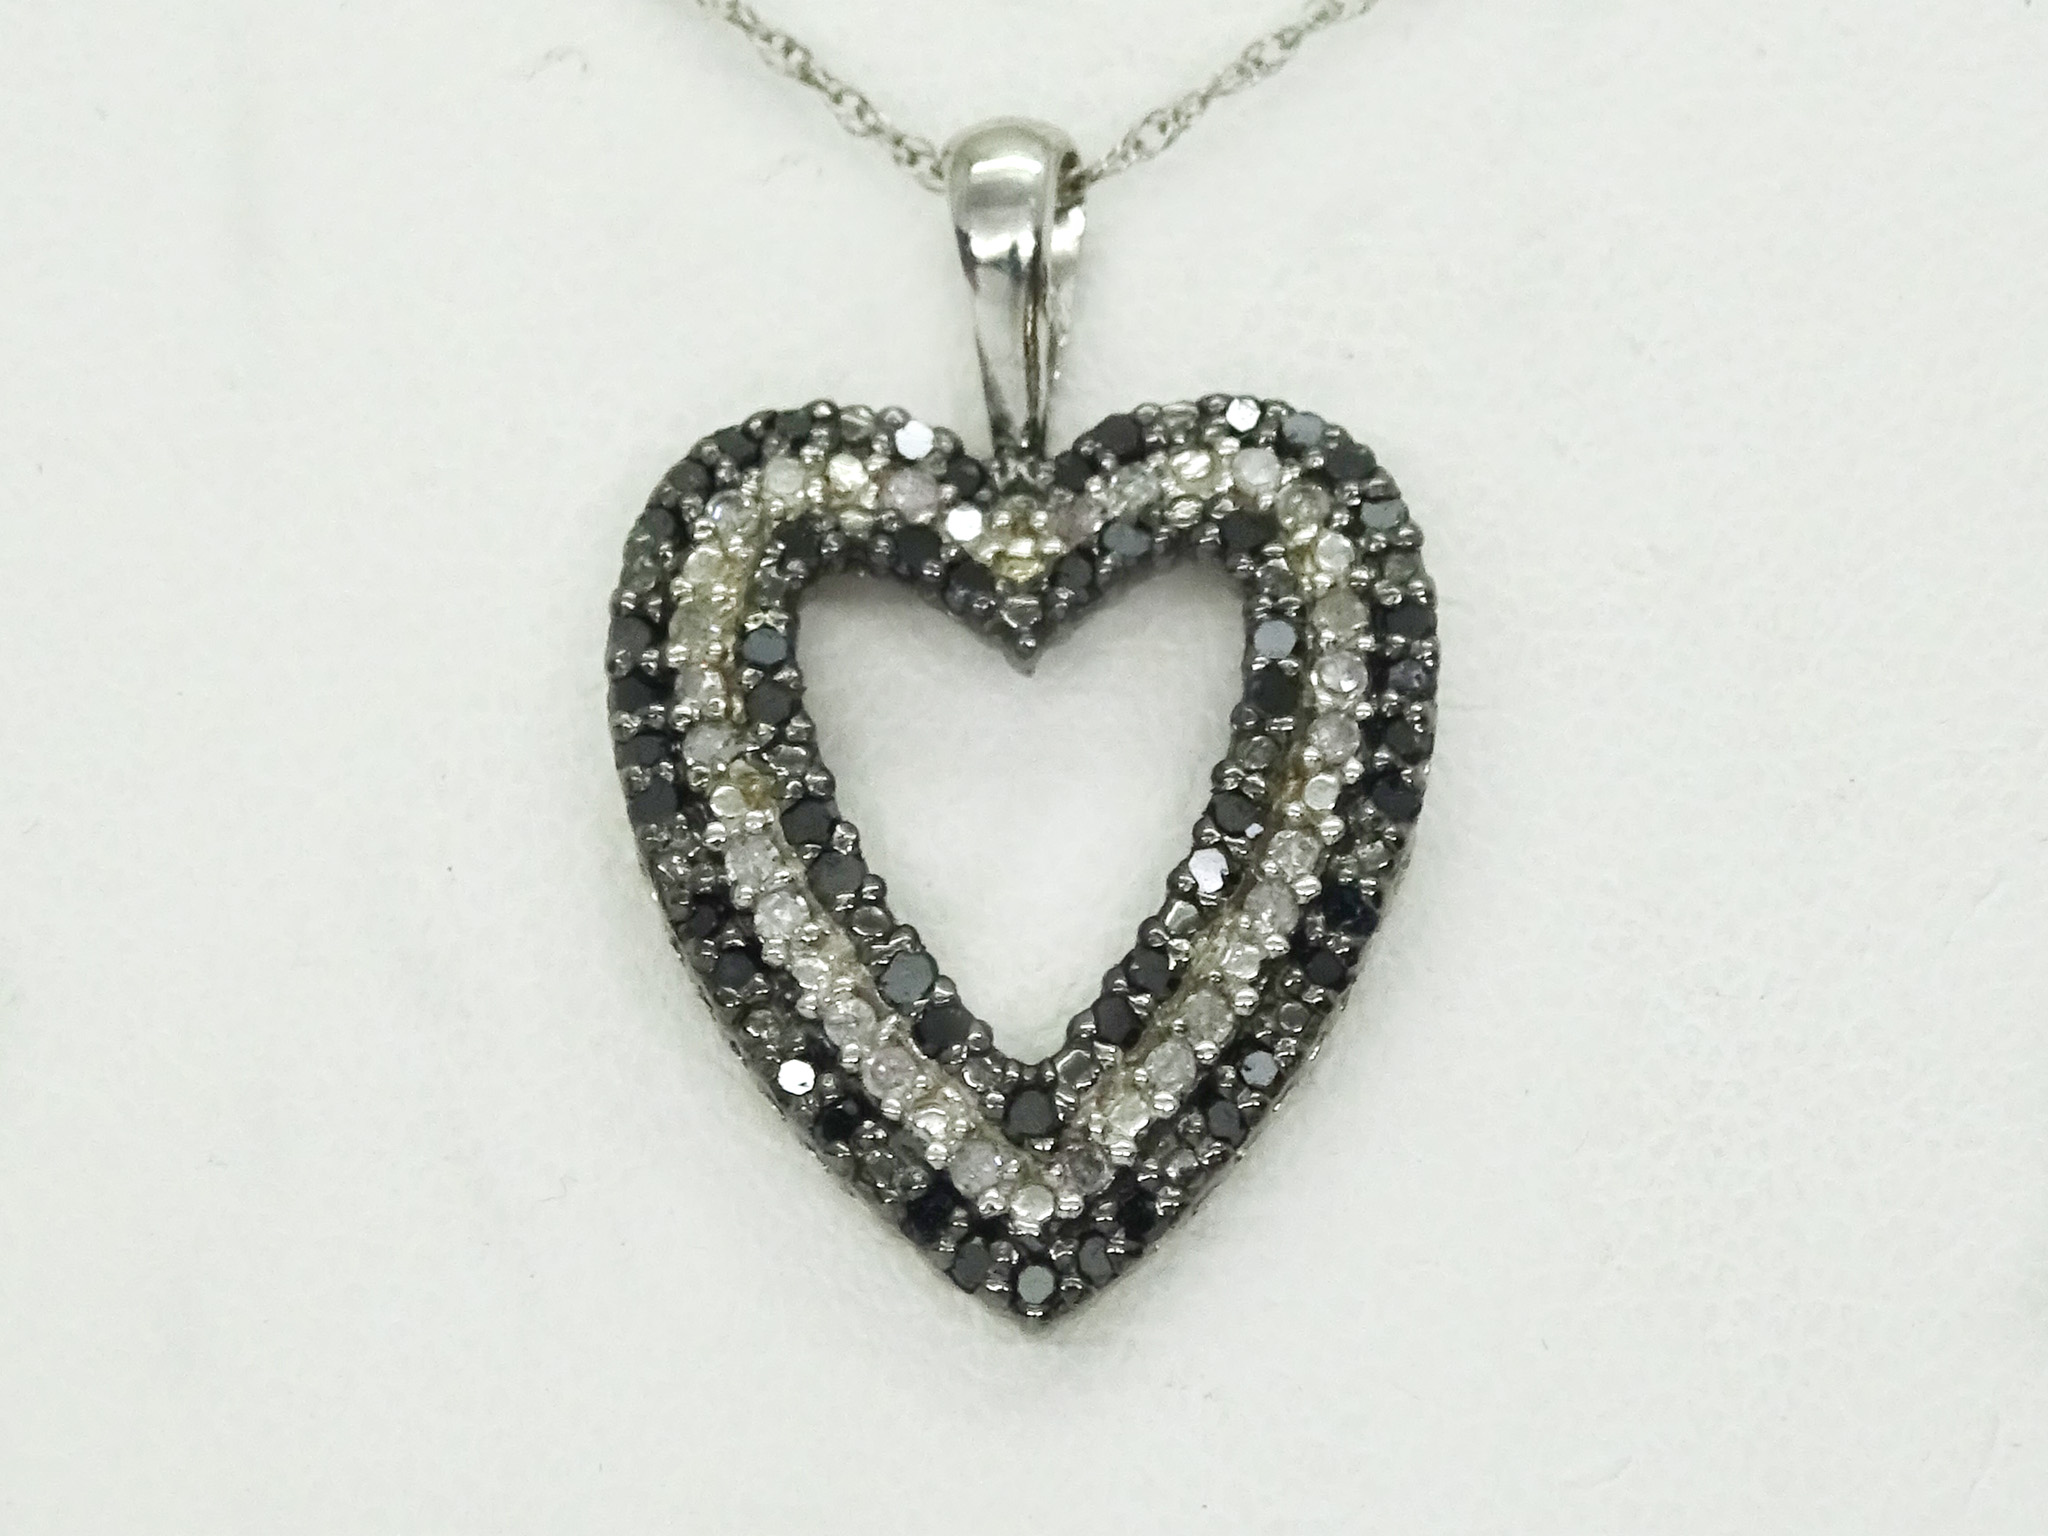 10k white gold black and white diamond heart pendant necklace Black White Diamond 10k White Gold Open Heart Pendant Chain Necklace 18 Jewelry Coin Mart